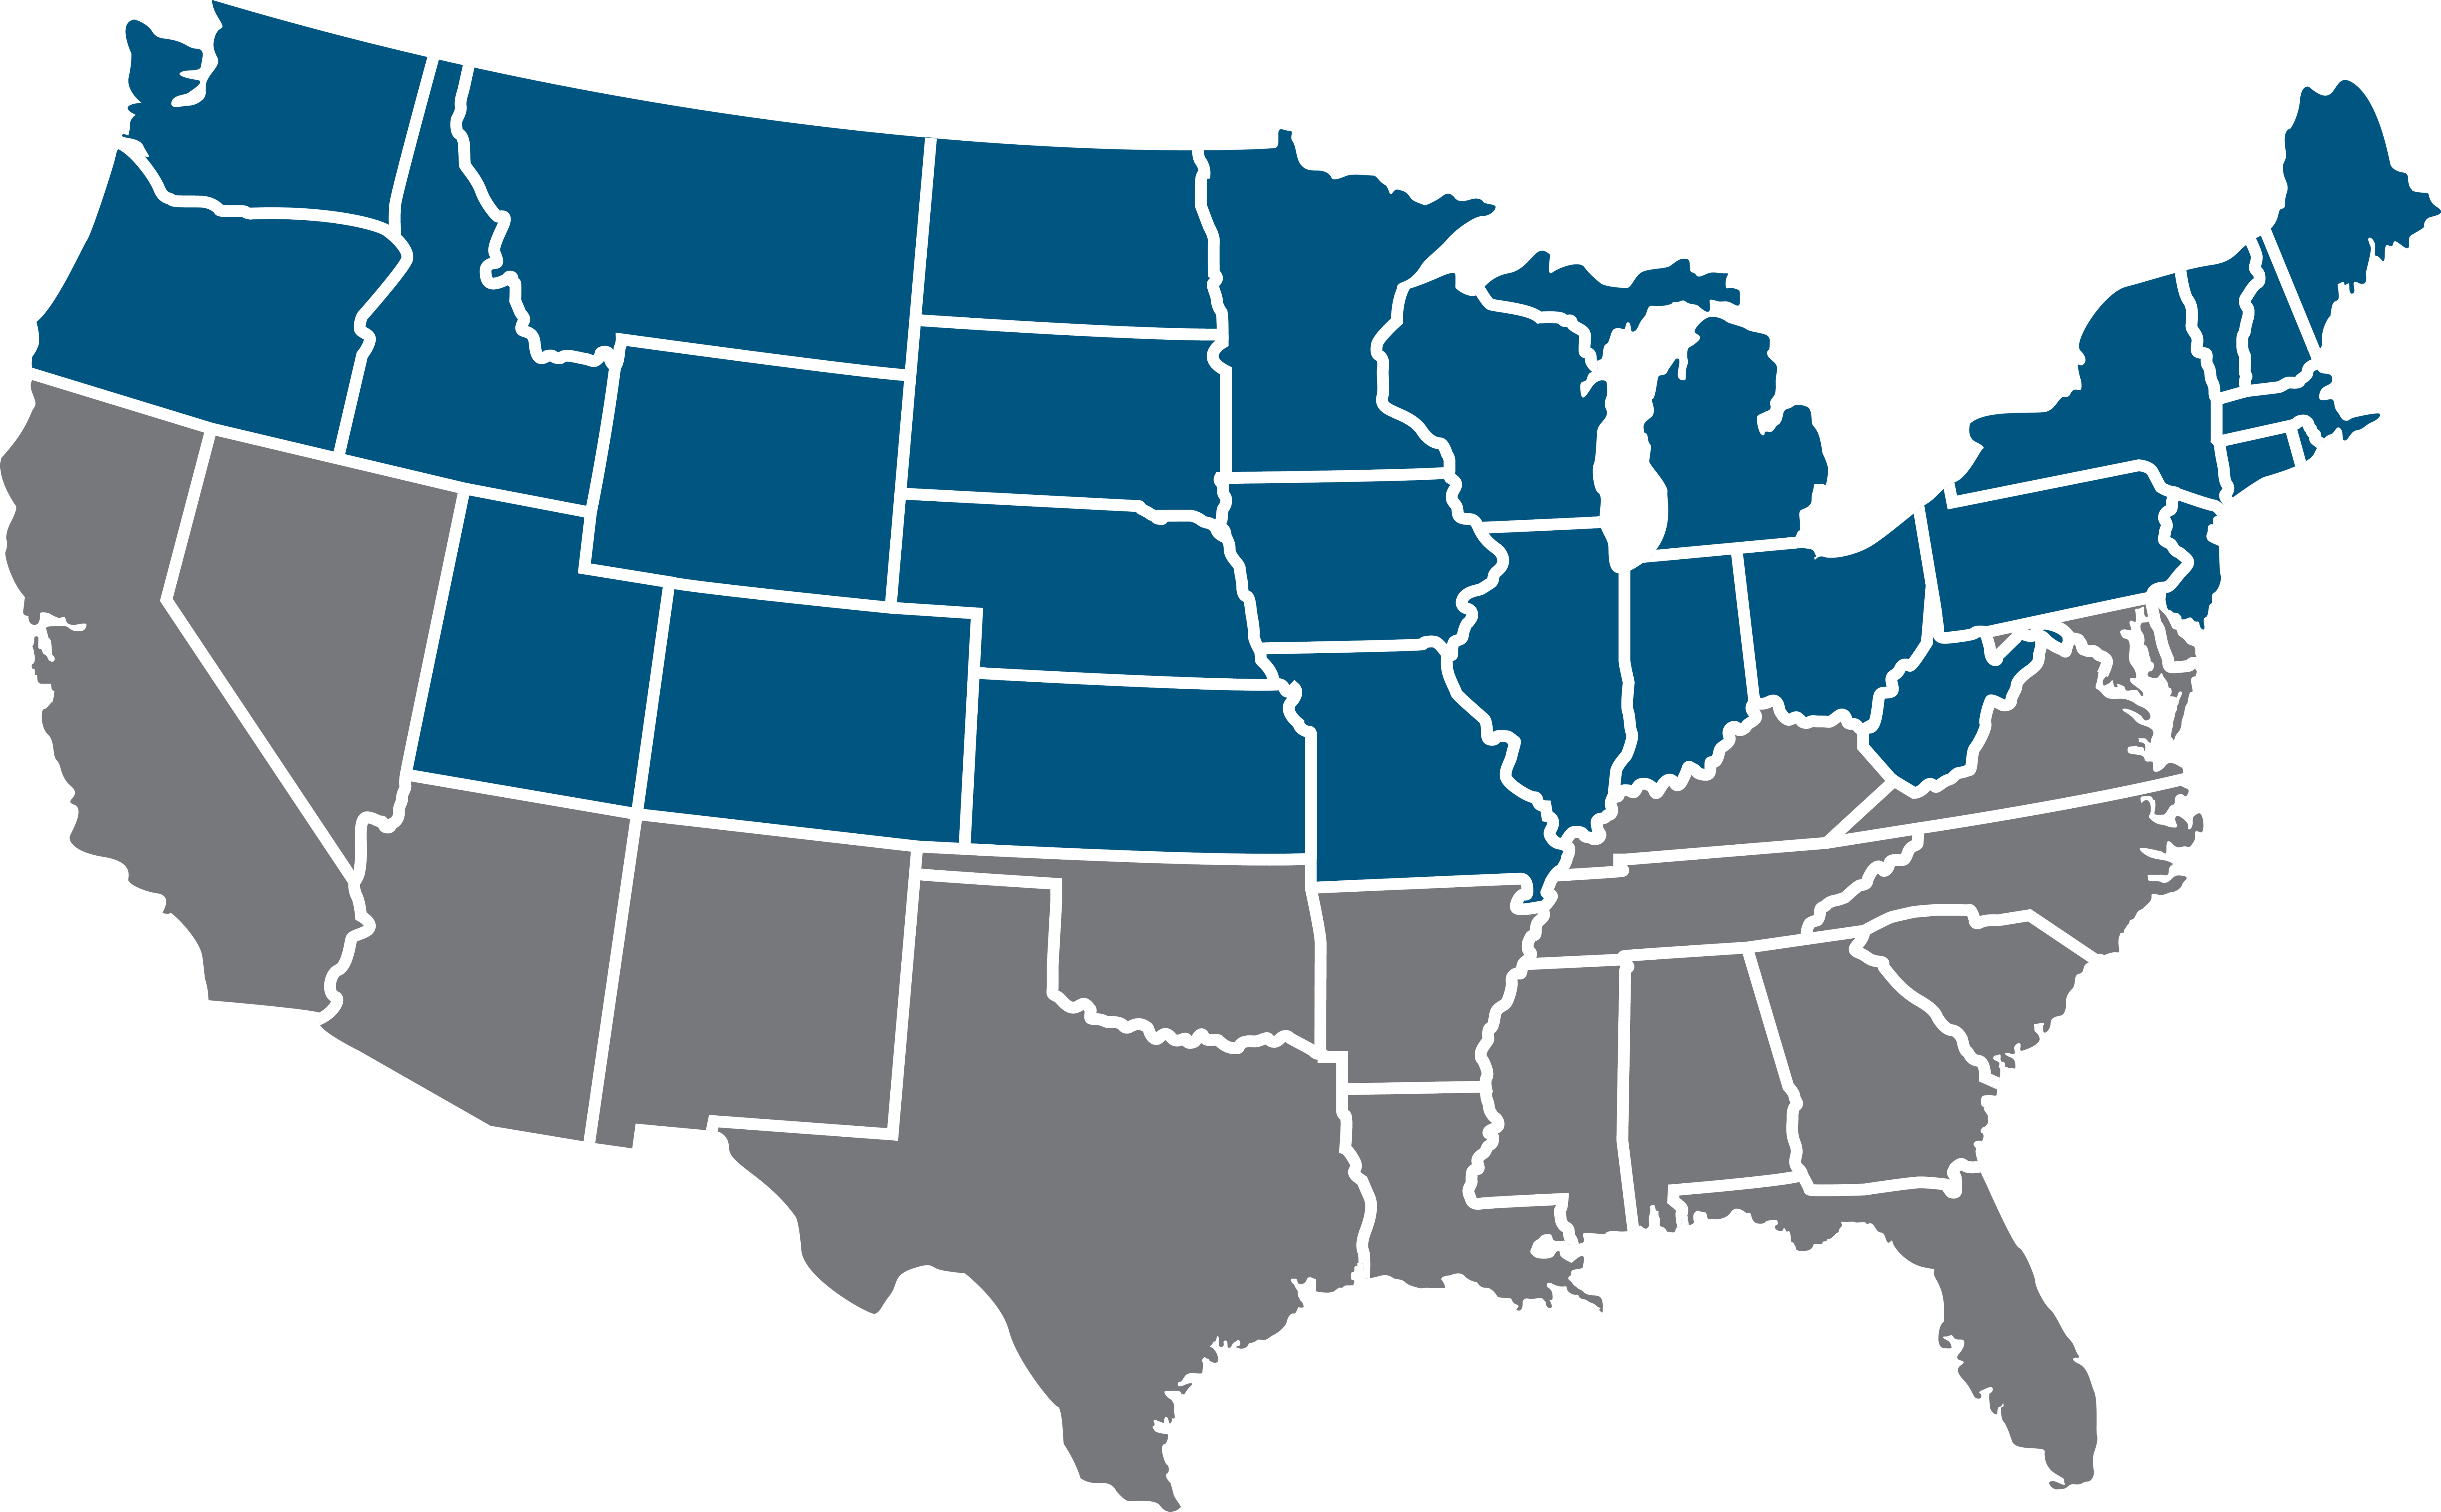 Map of the United States, with the North Region in light blue, the Southwest region in gray blue, and the South Region in dark blue.